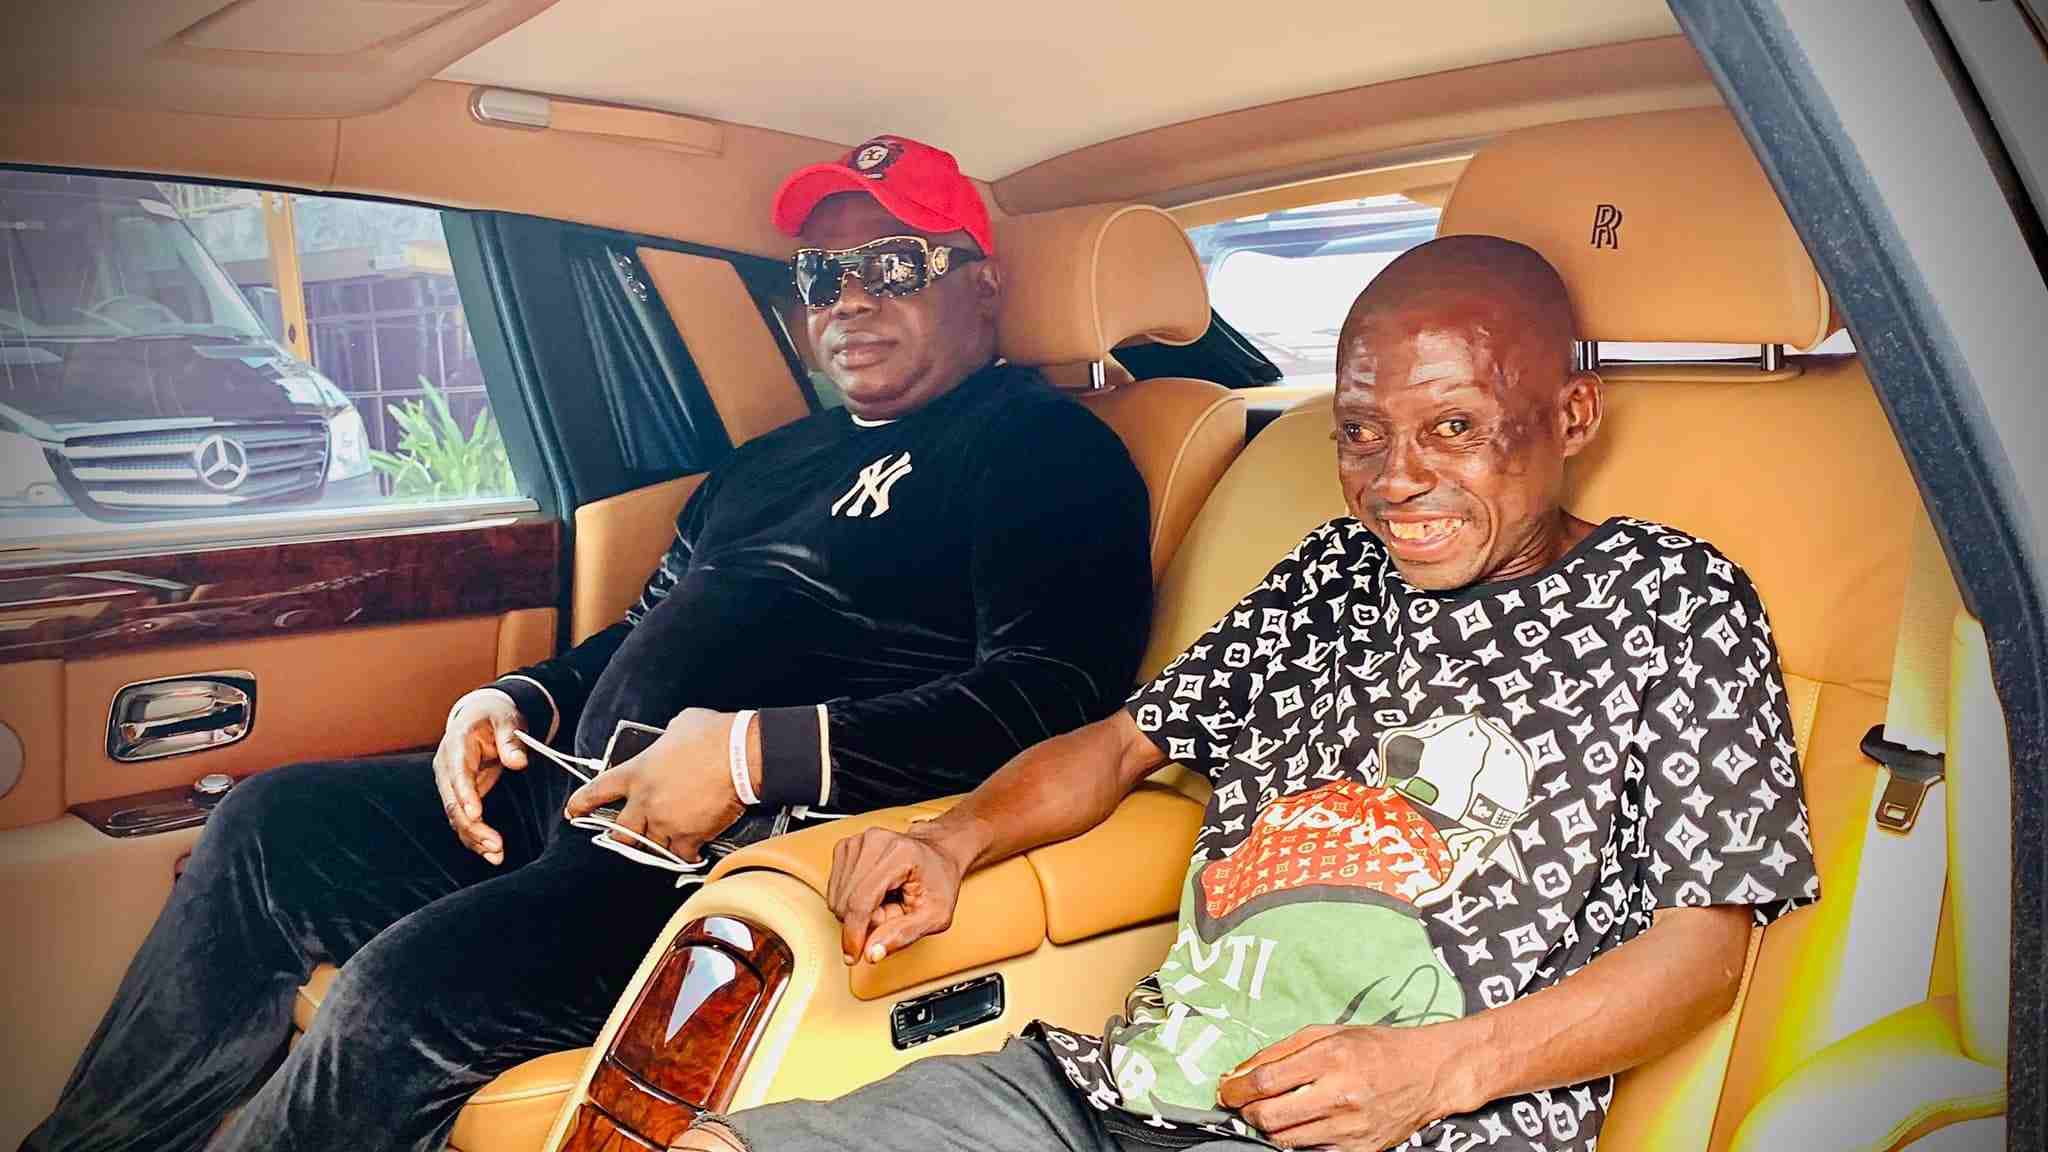 Apostle Chibuzor Chinyere Furnishes Brand New Shop For Mr. Spellz, Gives Him New Apartment (PHOTOS)